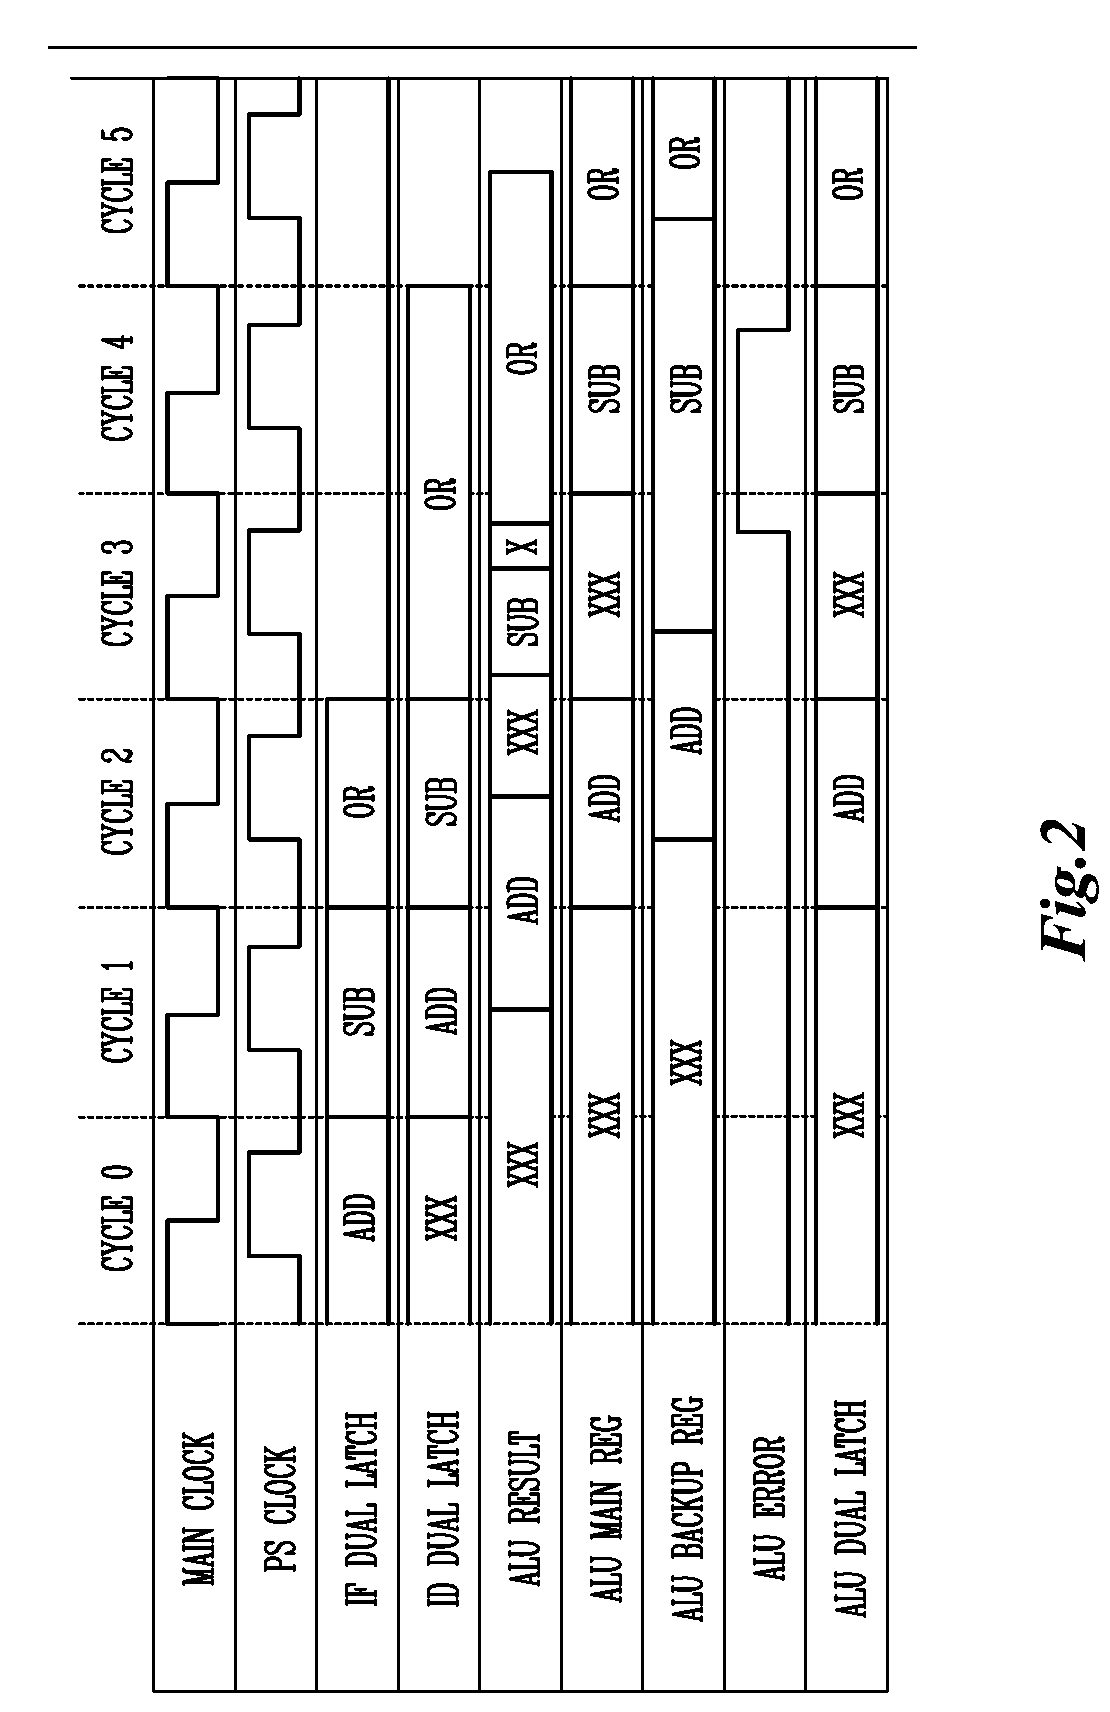 Superscale processor performance enhancement through reliable dynamic clock frequency tuning